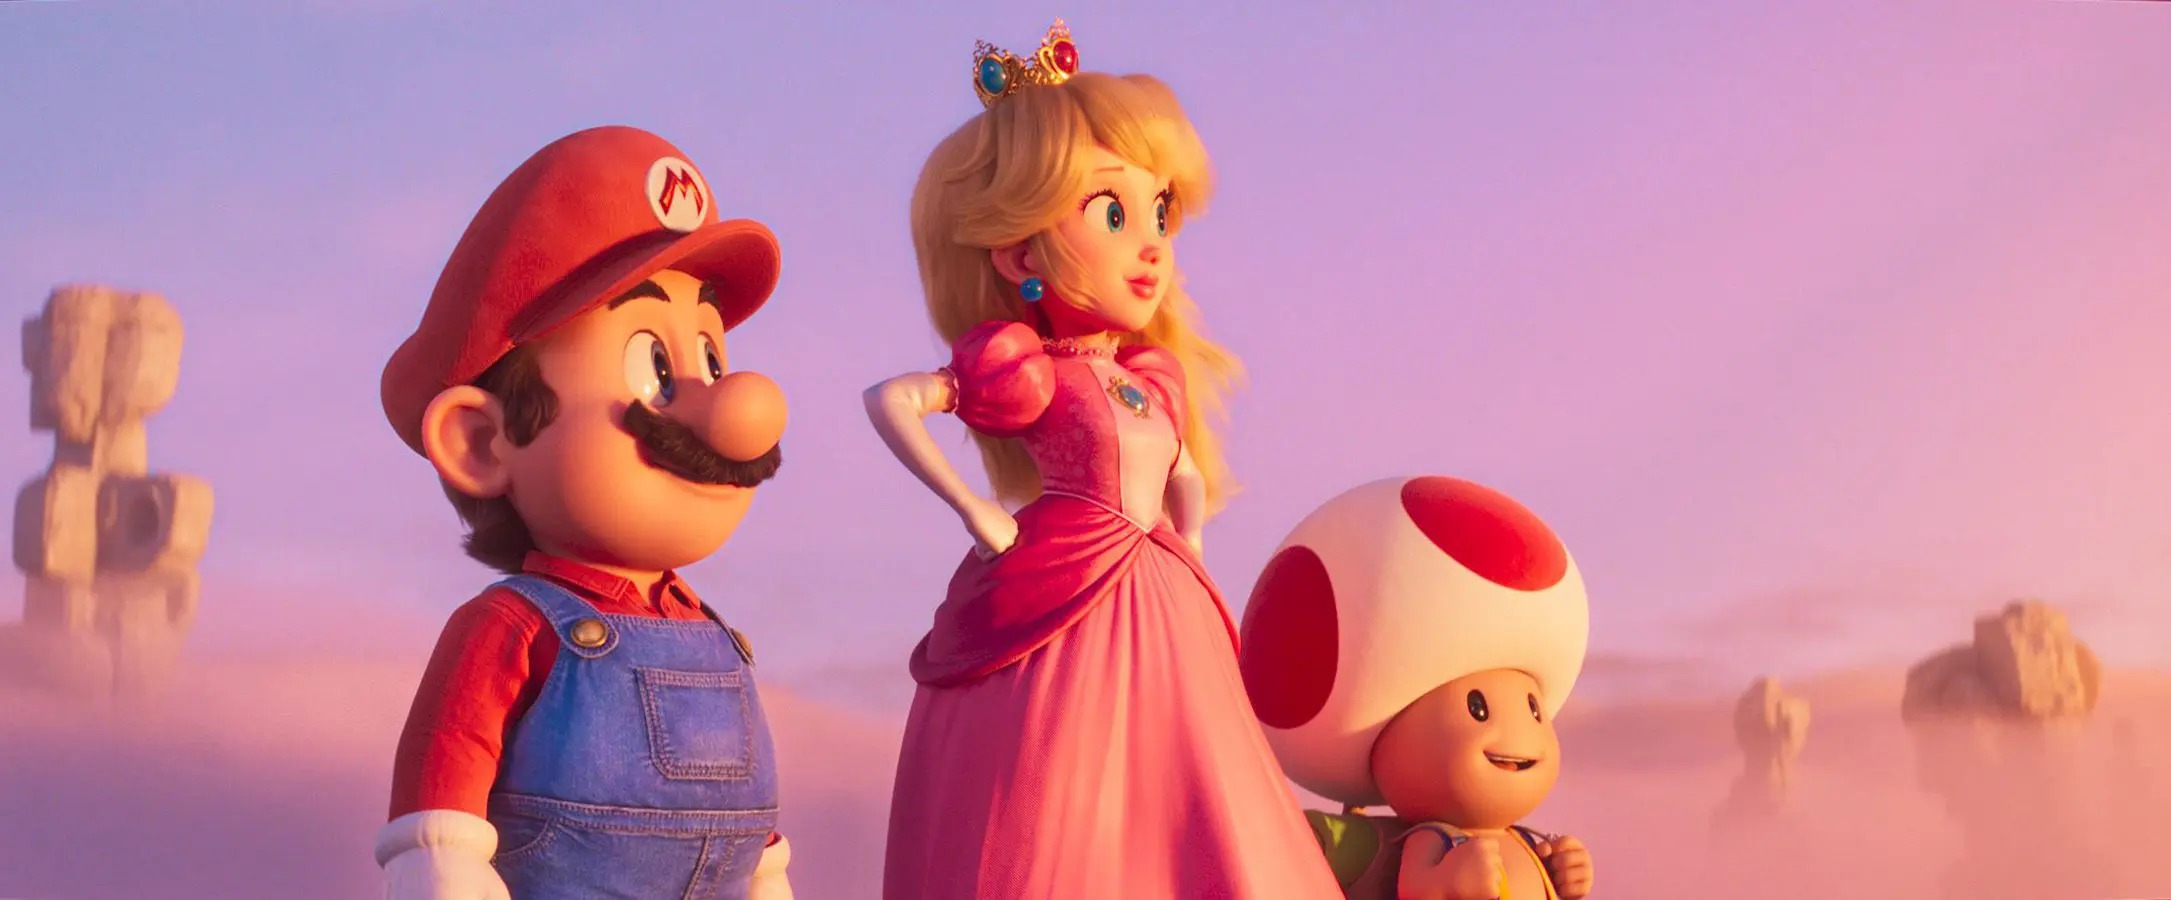 The Super Mario Bros. Movie Beats Out Frozen to Become the 2nd Highest-Grossing Animated Film of All Time